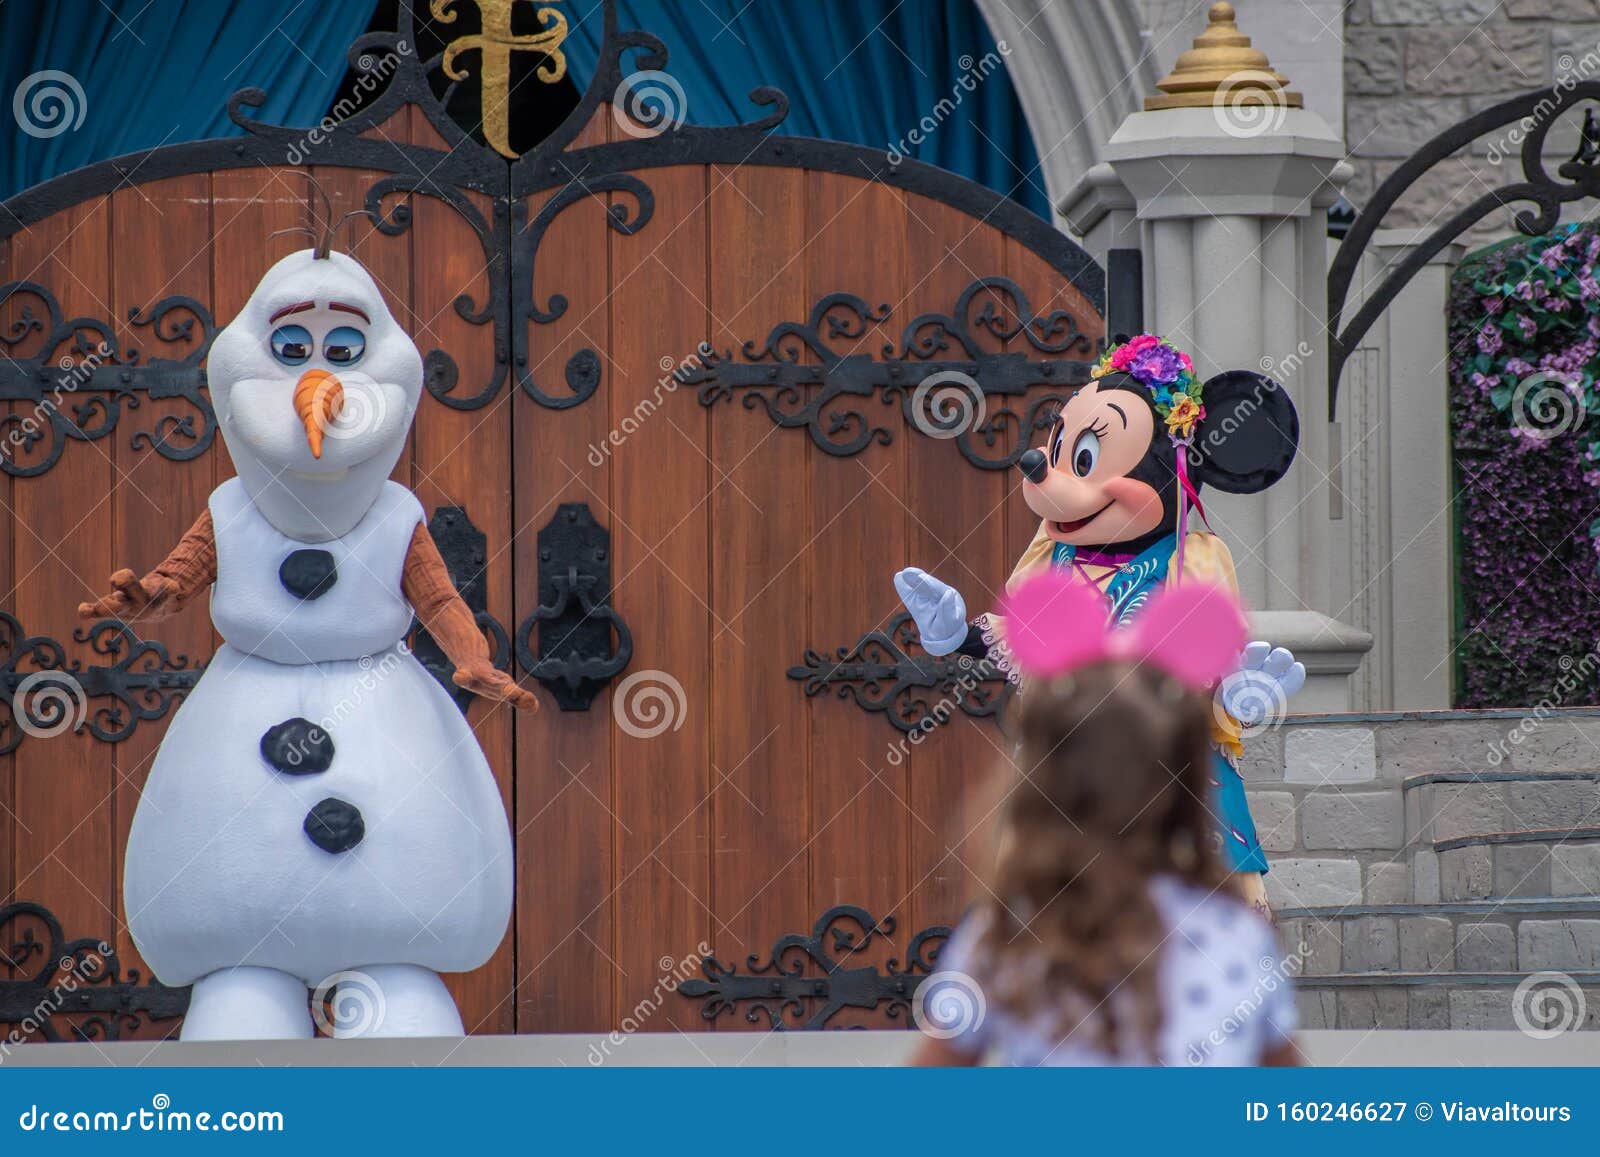 Olaf and Minnie in Mickeys Royal Friendship Faire on Cinderella Castle in Magic at Walt Disney World Resort. Editorial Photography - Image of imagination, holidays: 160246627